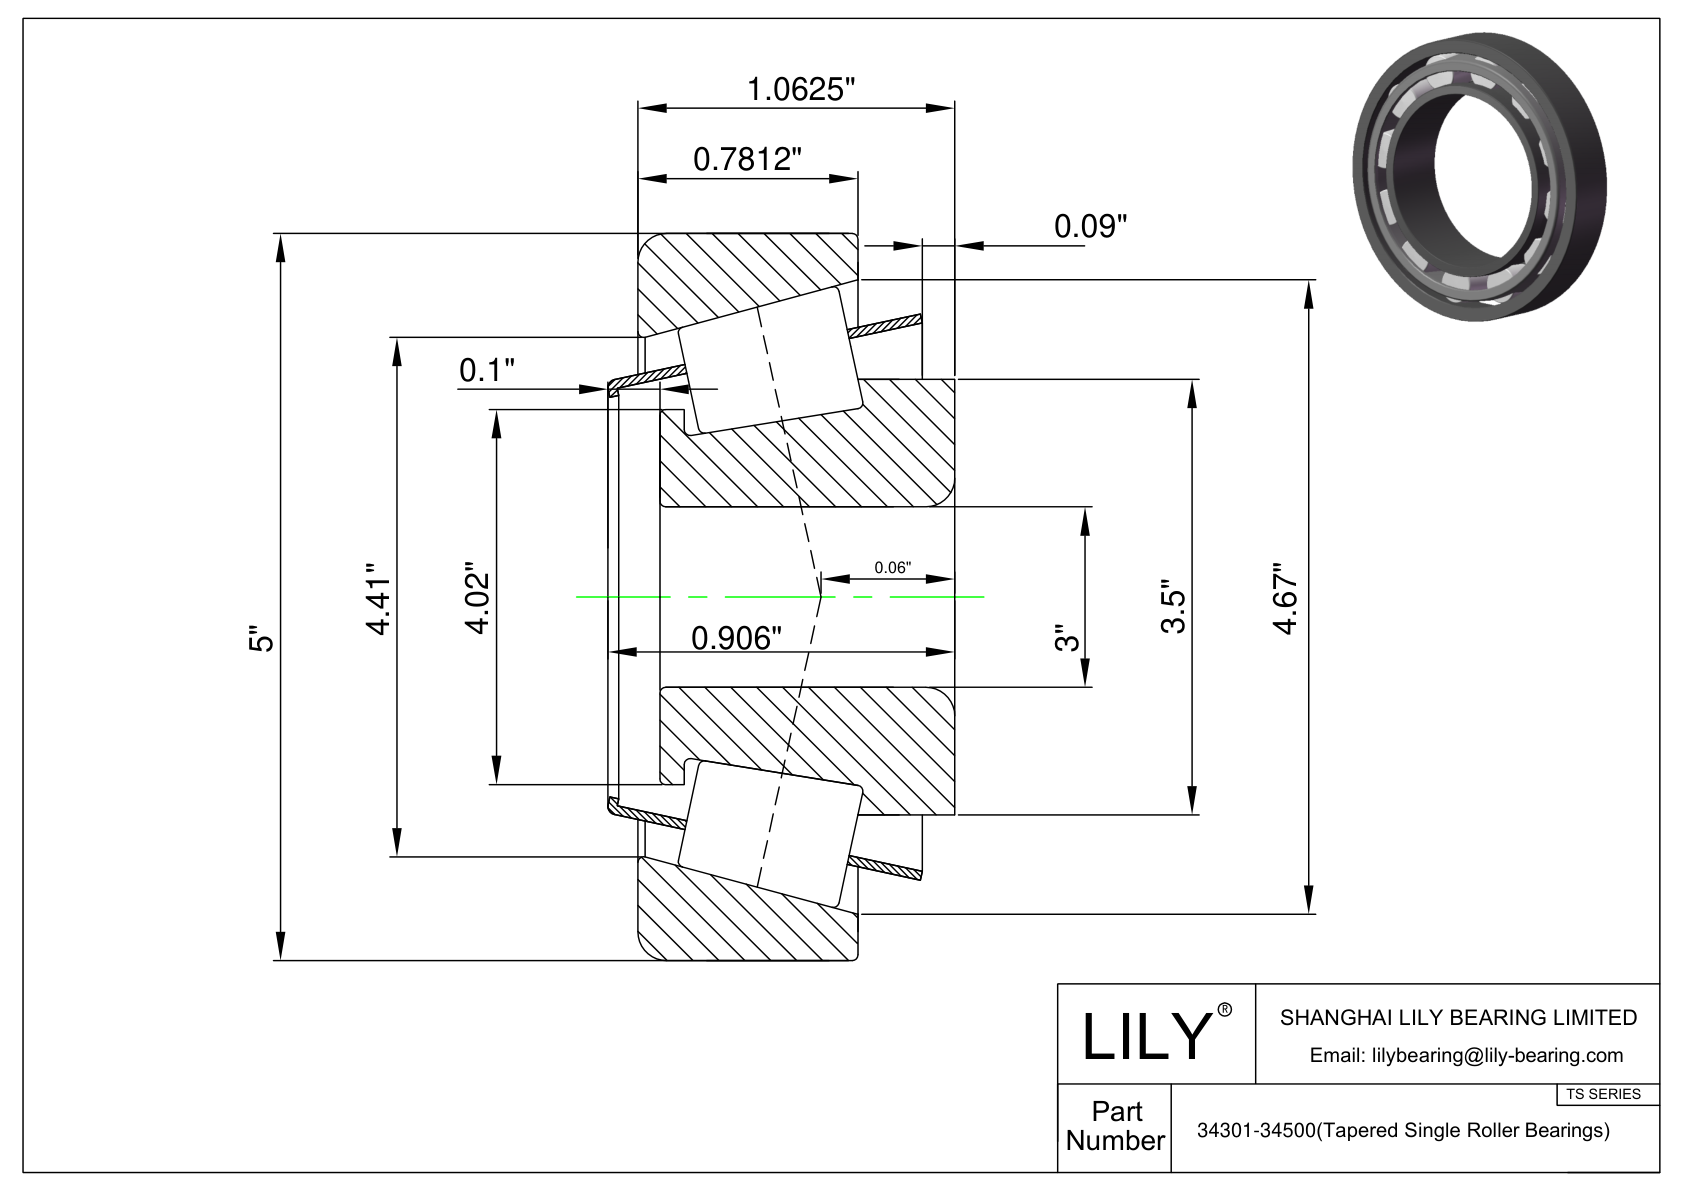 34301-34500 TS (Tapered Single Roller Bearings) (Imperial) cad drawing